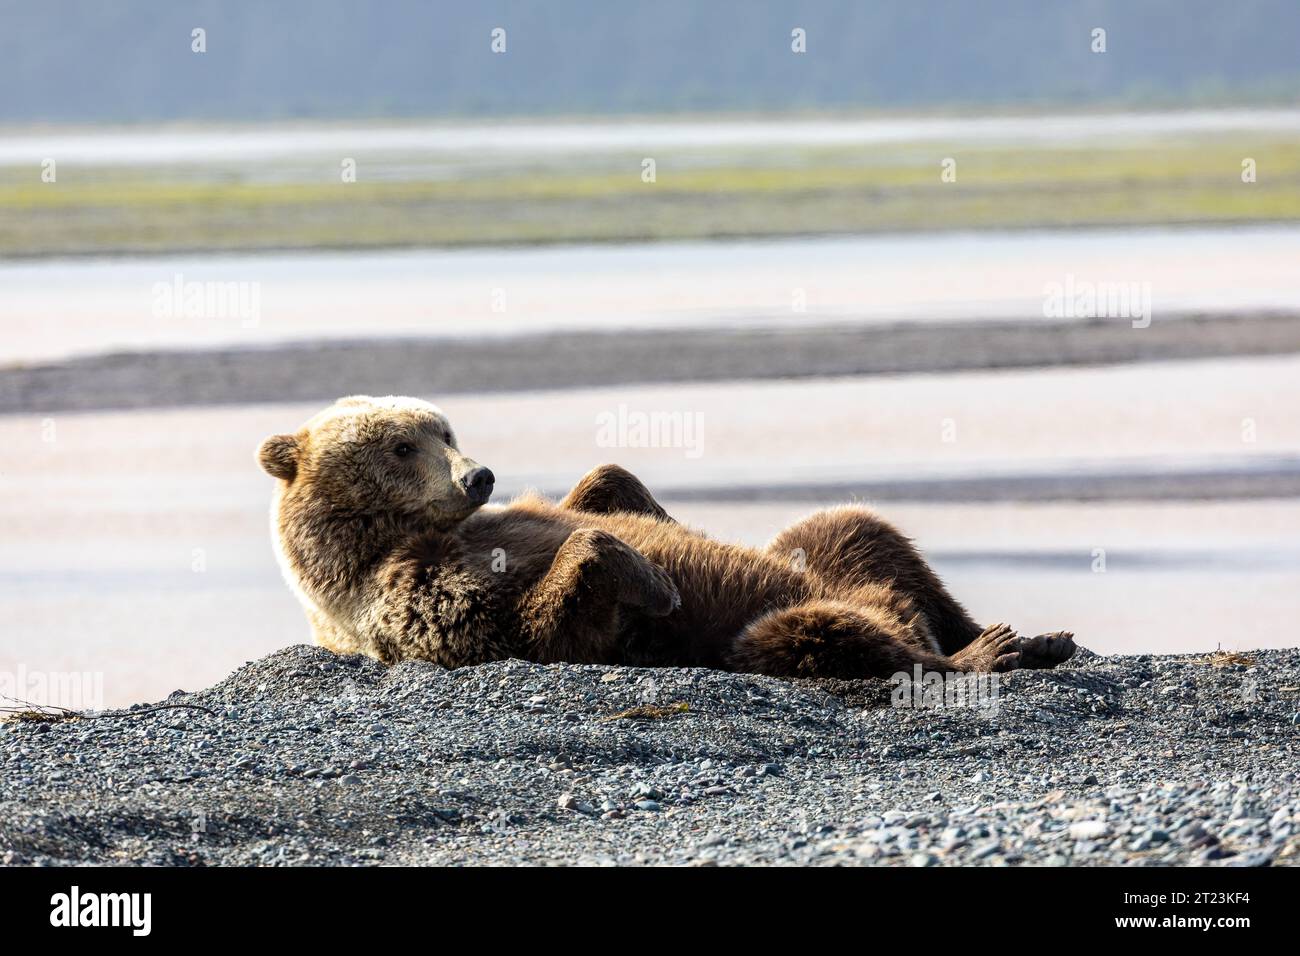 Adult grizzly bear, Ursus arctos horribilis, resting on his back in the black sandy beach of Chinitna Bay Alaska Stock Photo